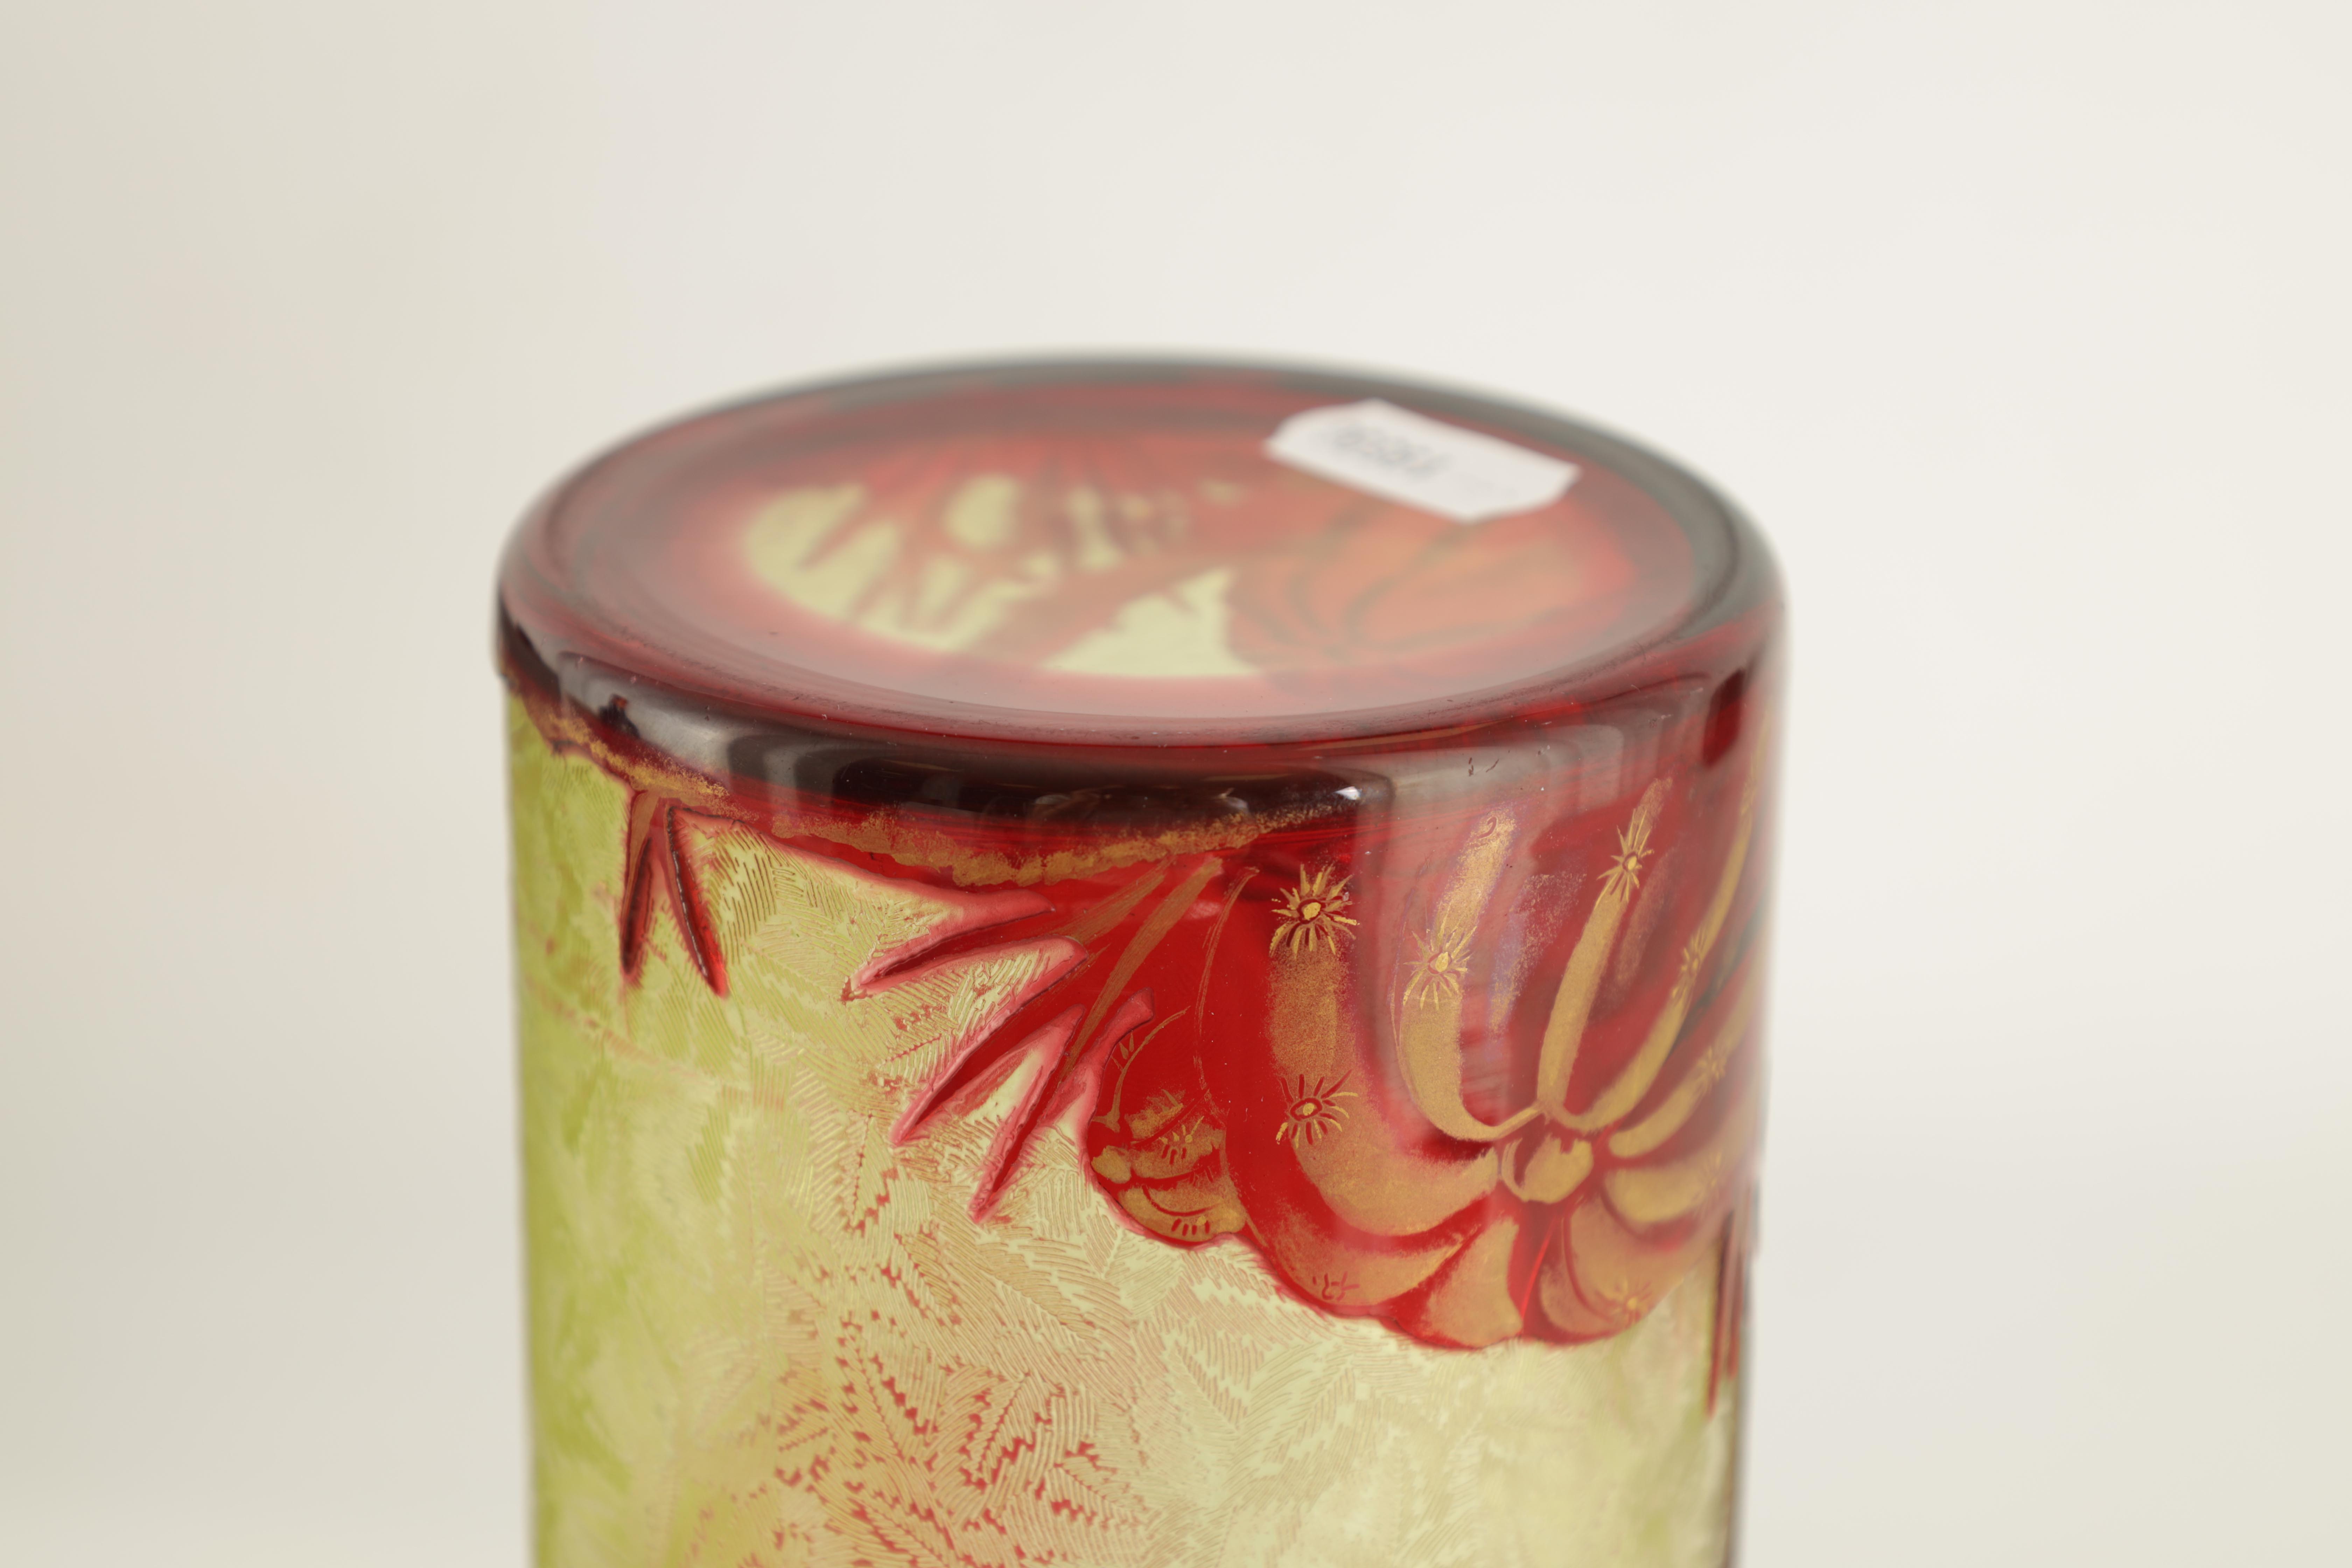 A STYLISH 20TH CENTURY BACCARAT GLASS ETCHED CYLINDRICAL VASE with acid-etched decoration - Image 4 of 6